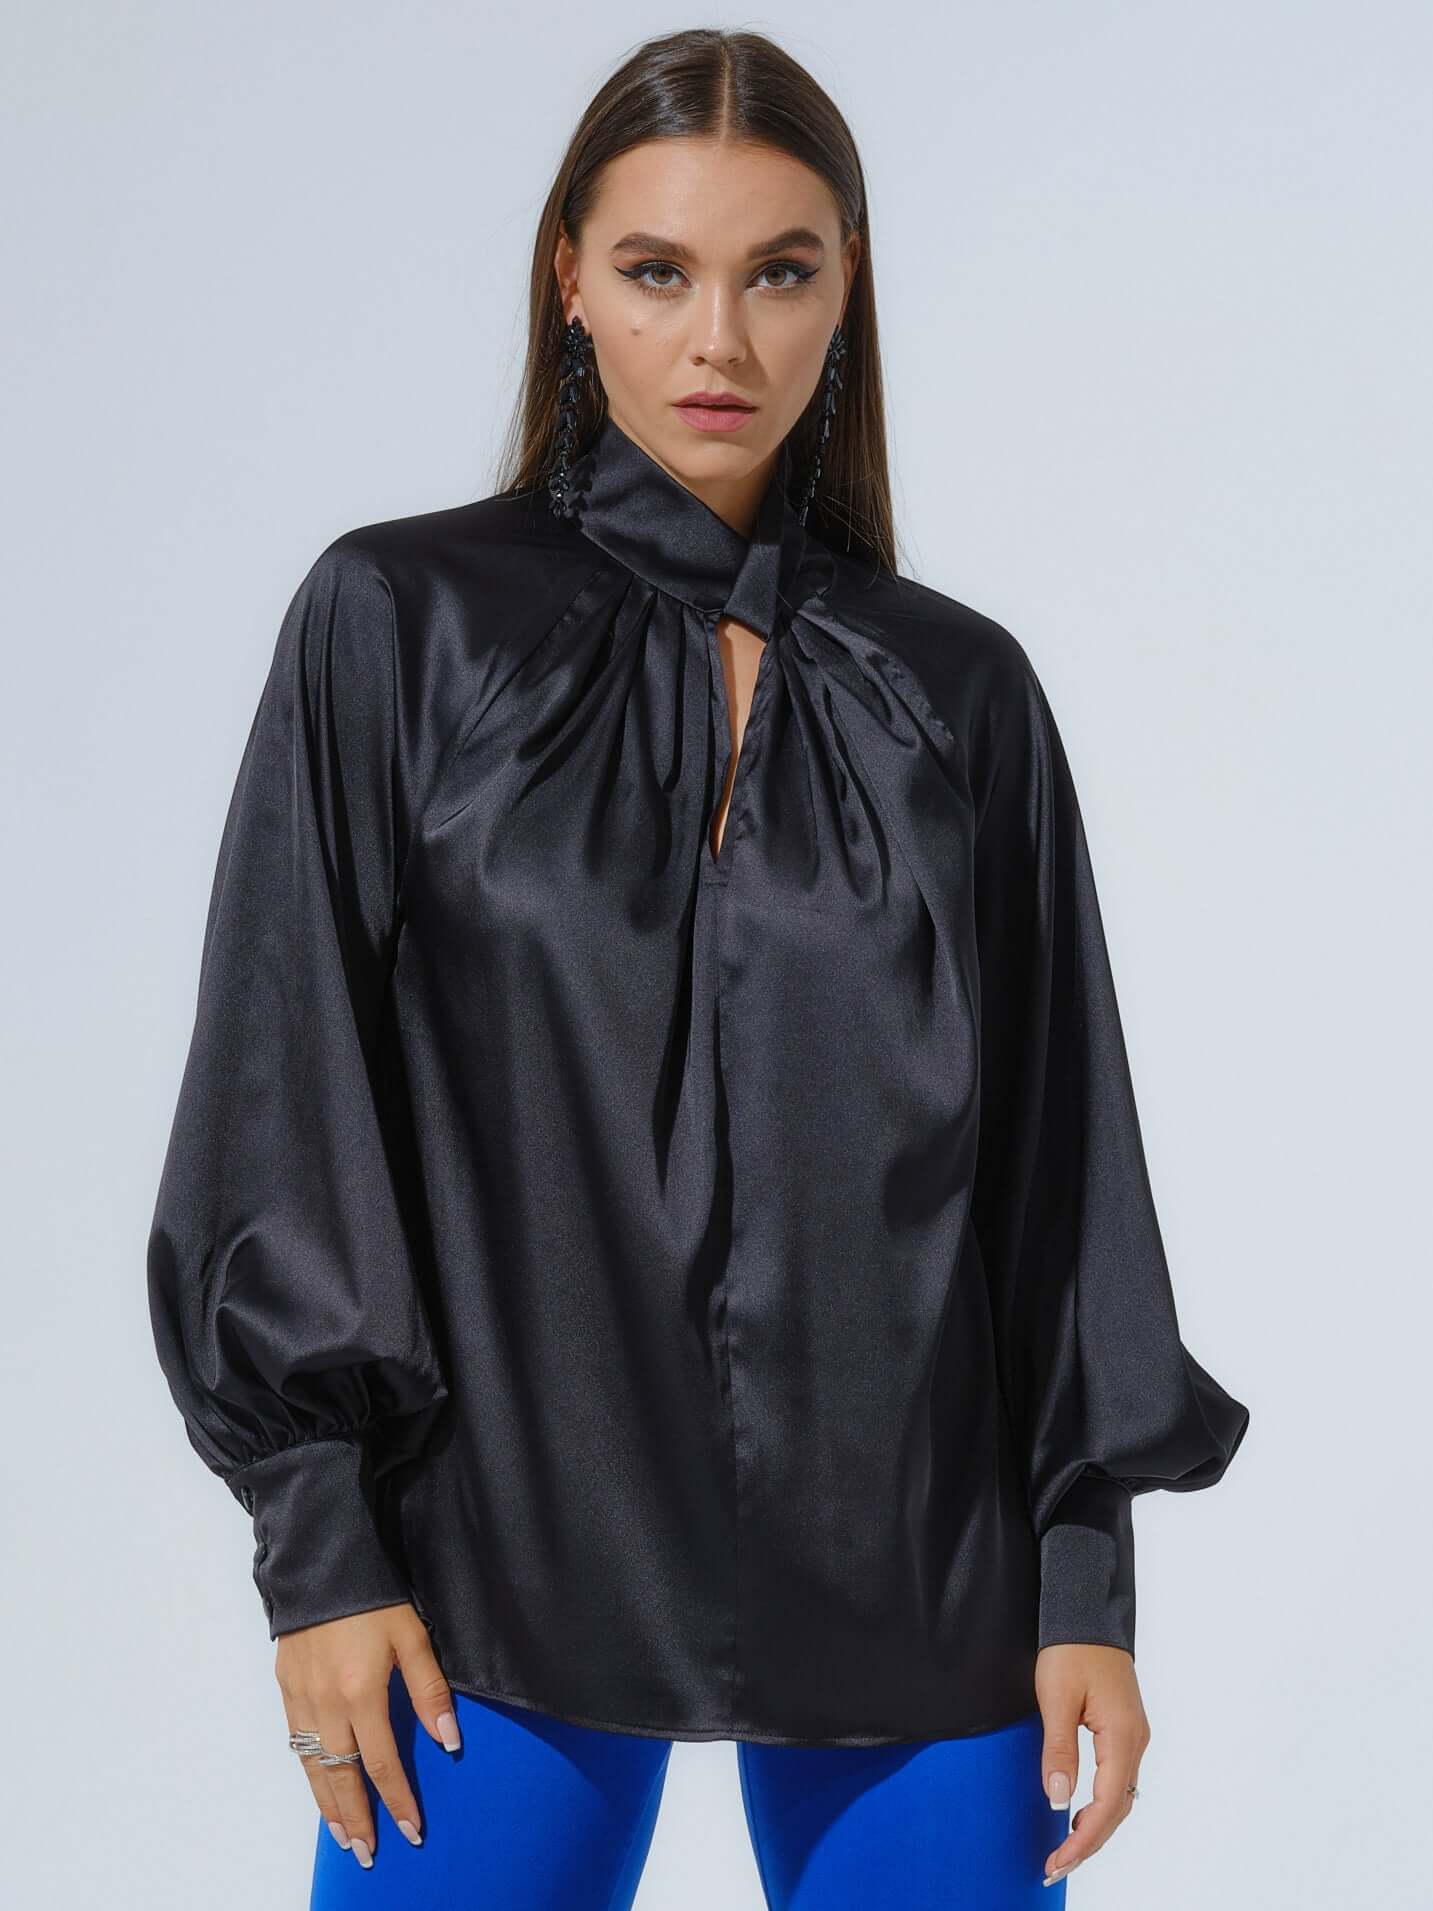 Get Down to Business Oversized Blouse - Black by Tia Dorraine Women's Luxury Fashion Designer Clothing Brand